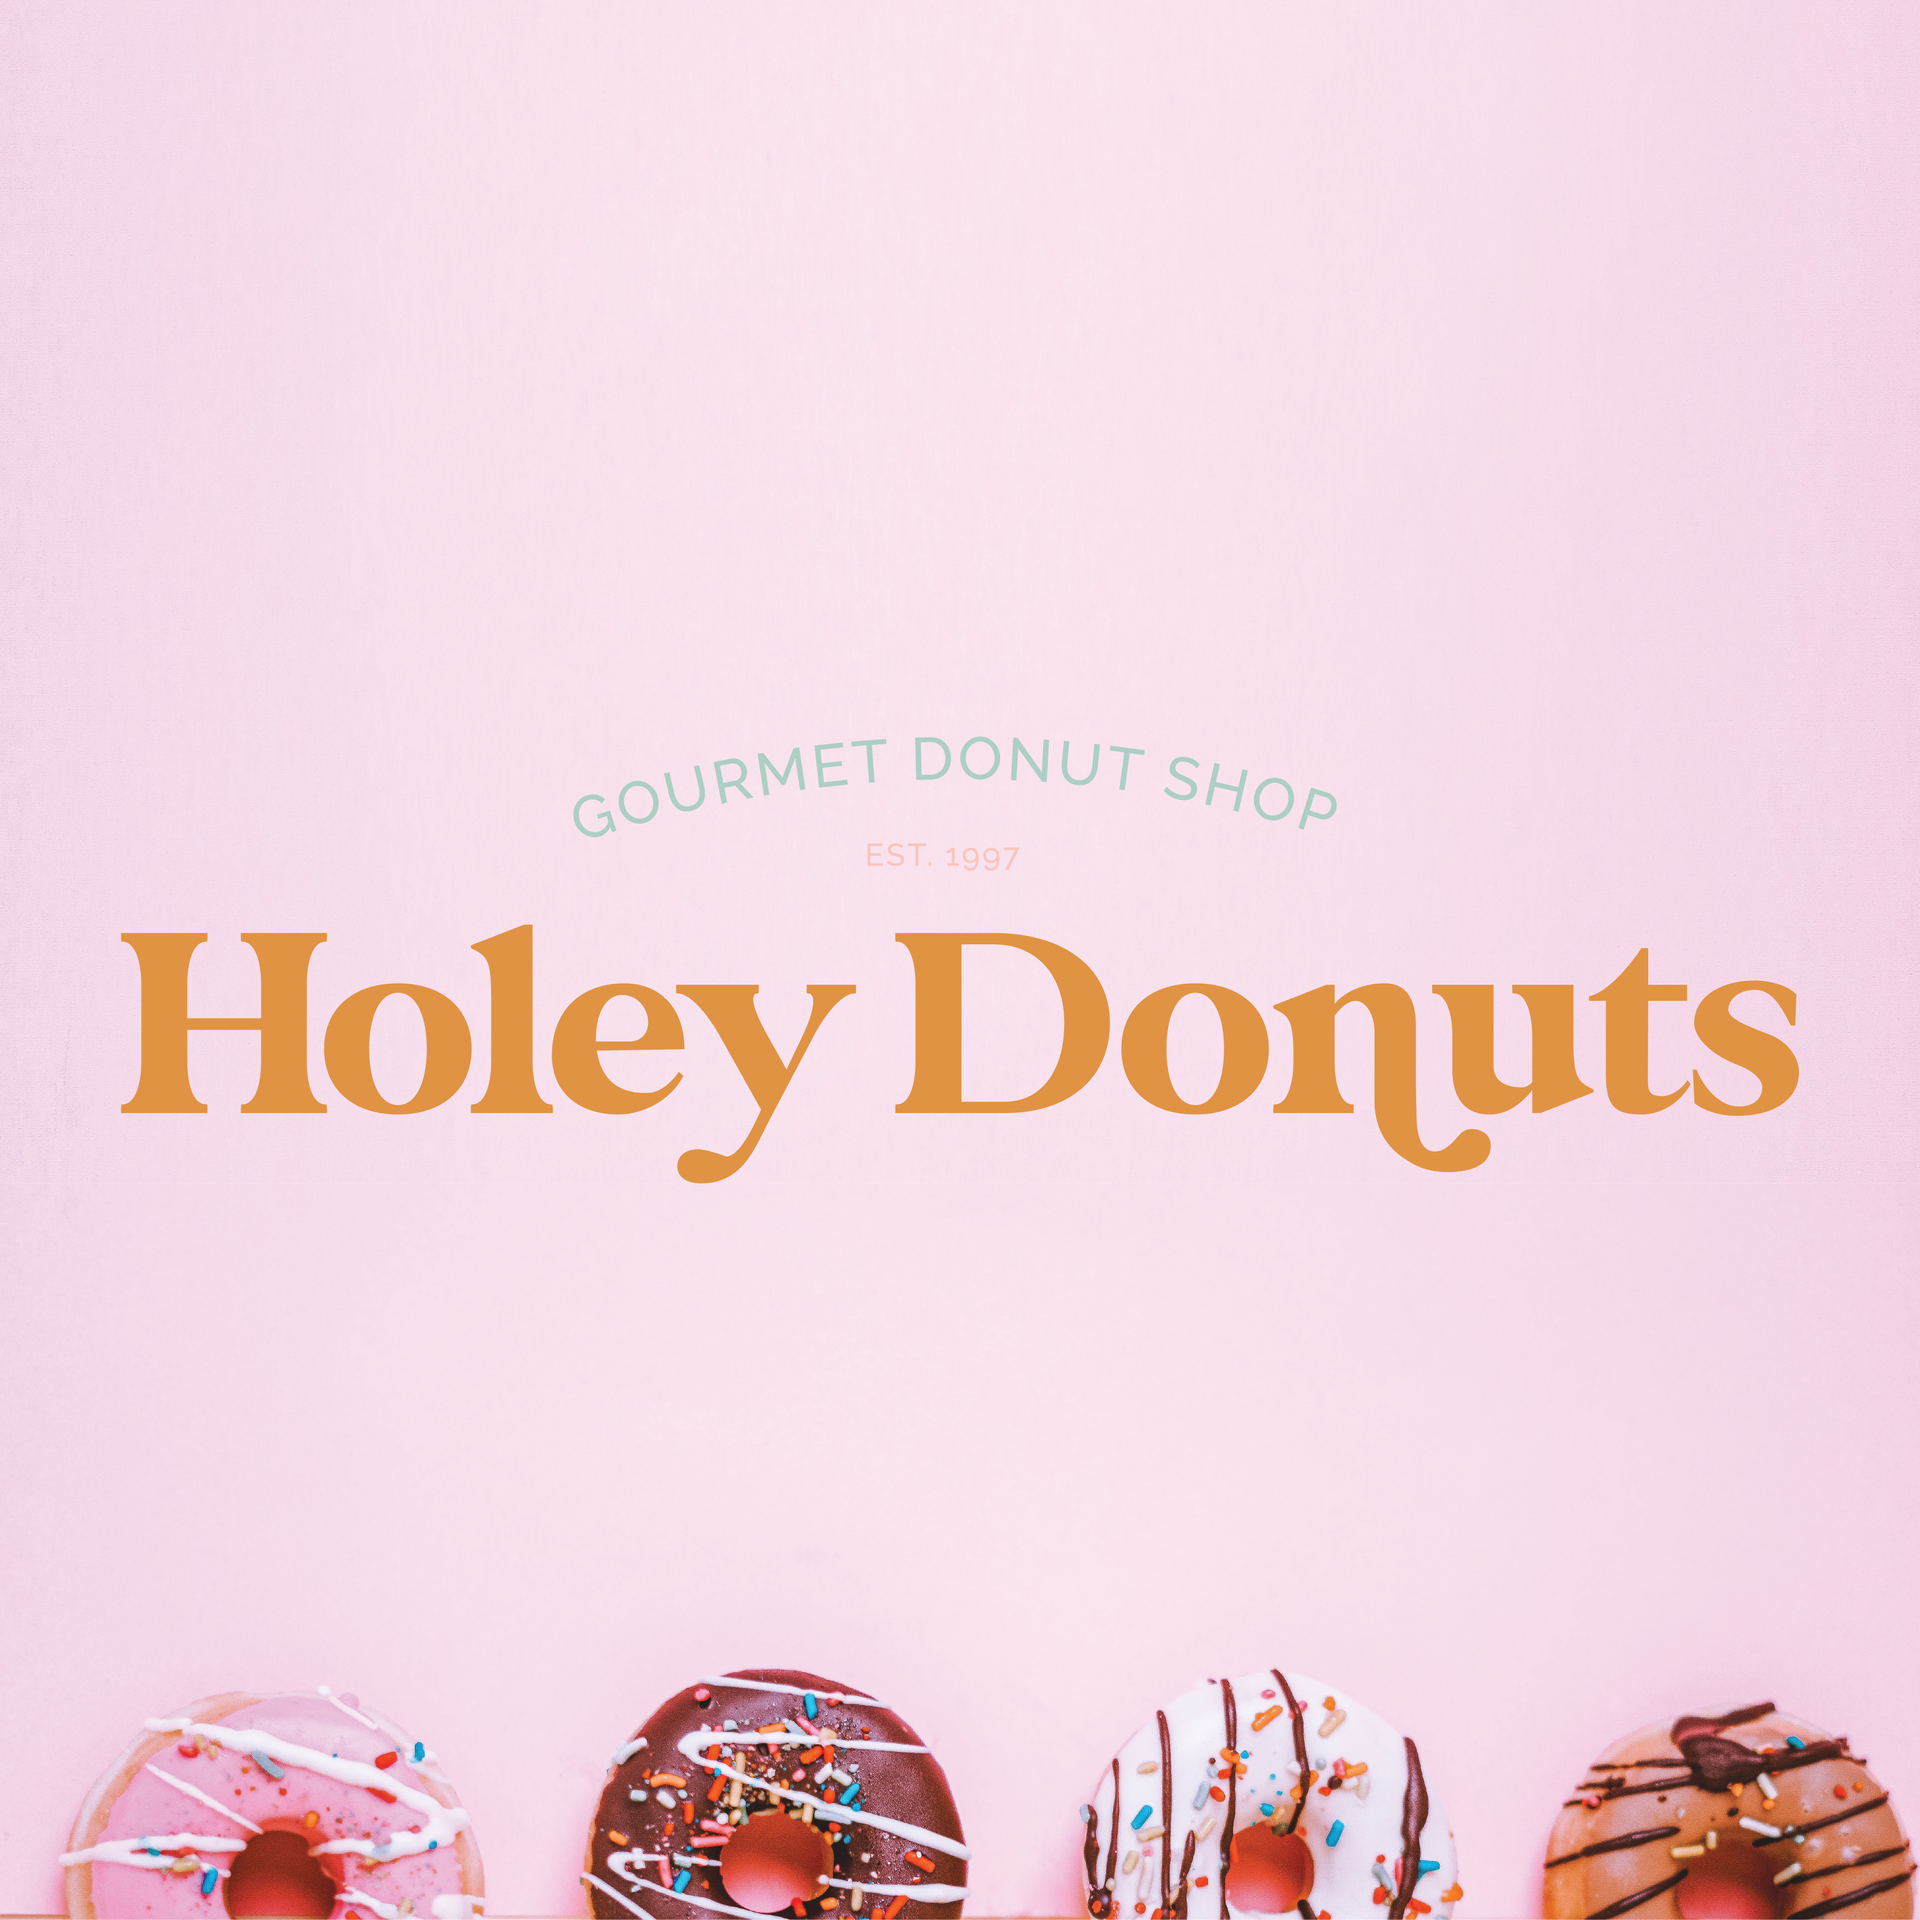 Three donuts are lined up in a row on a pink background.